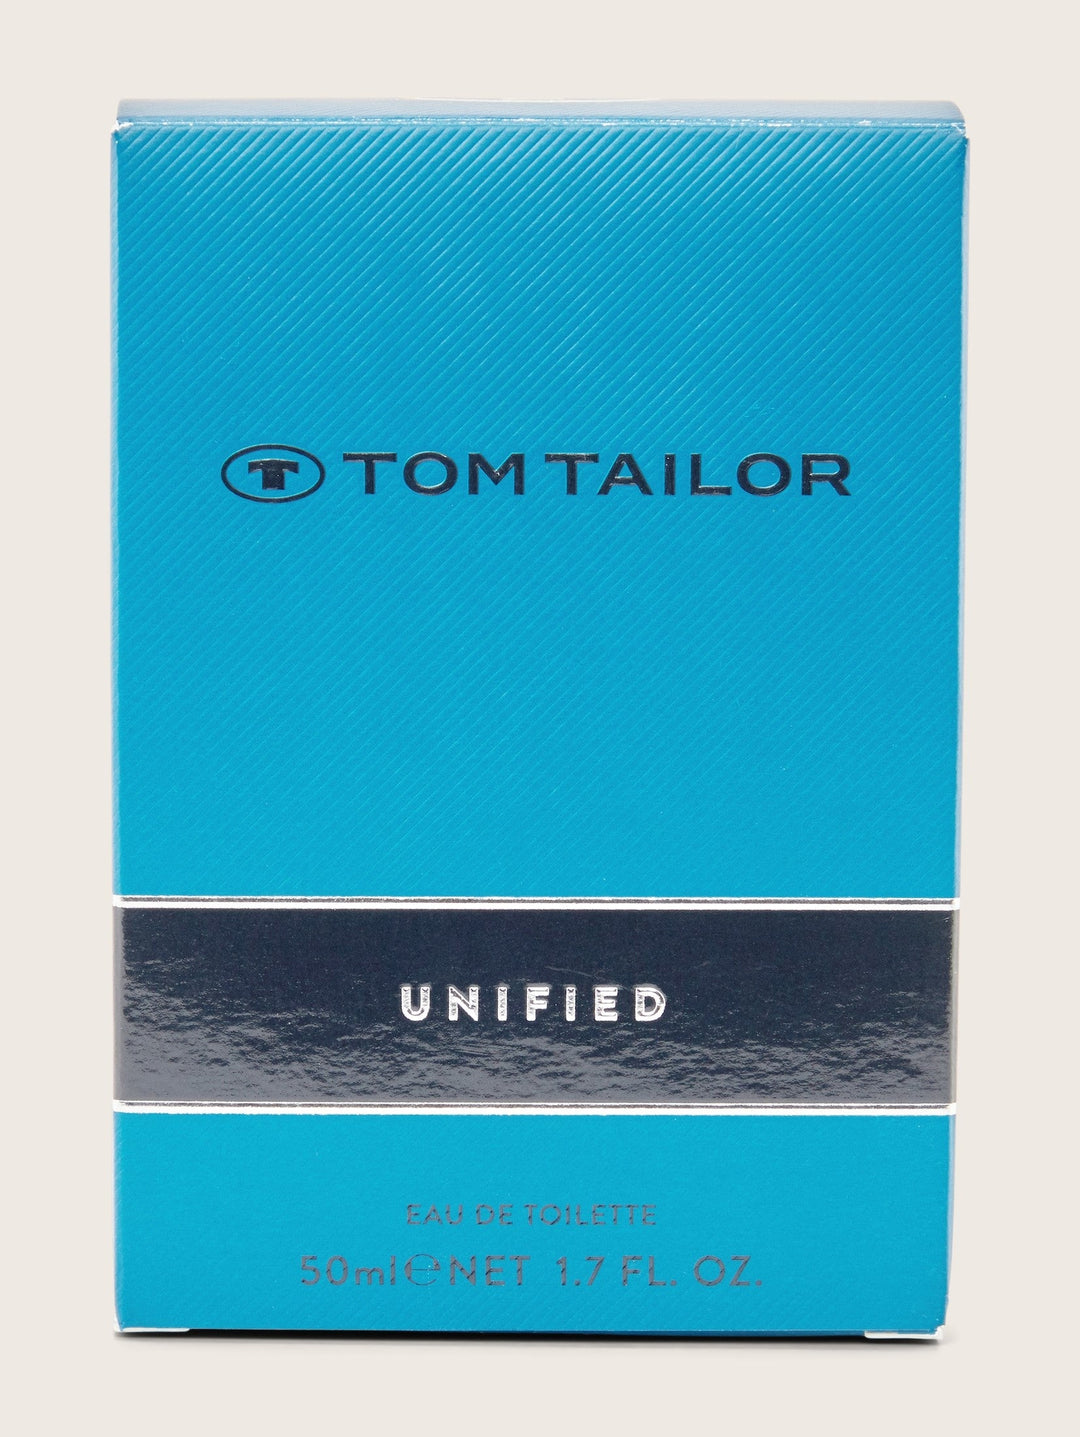 50ML EDT UNIFIED Square – TAILOR Deal TOM MAN